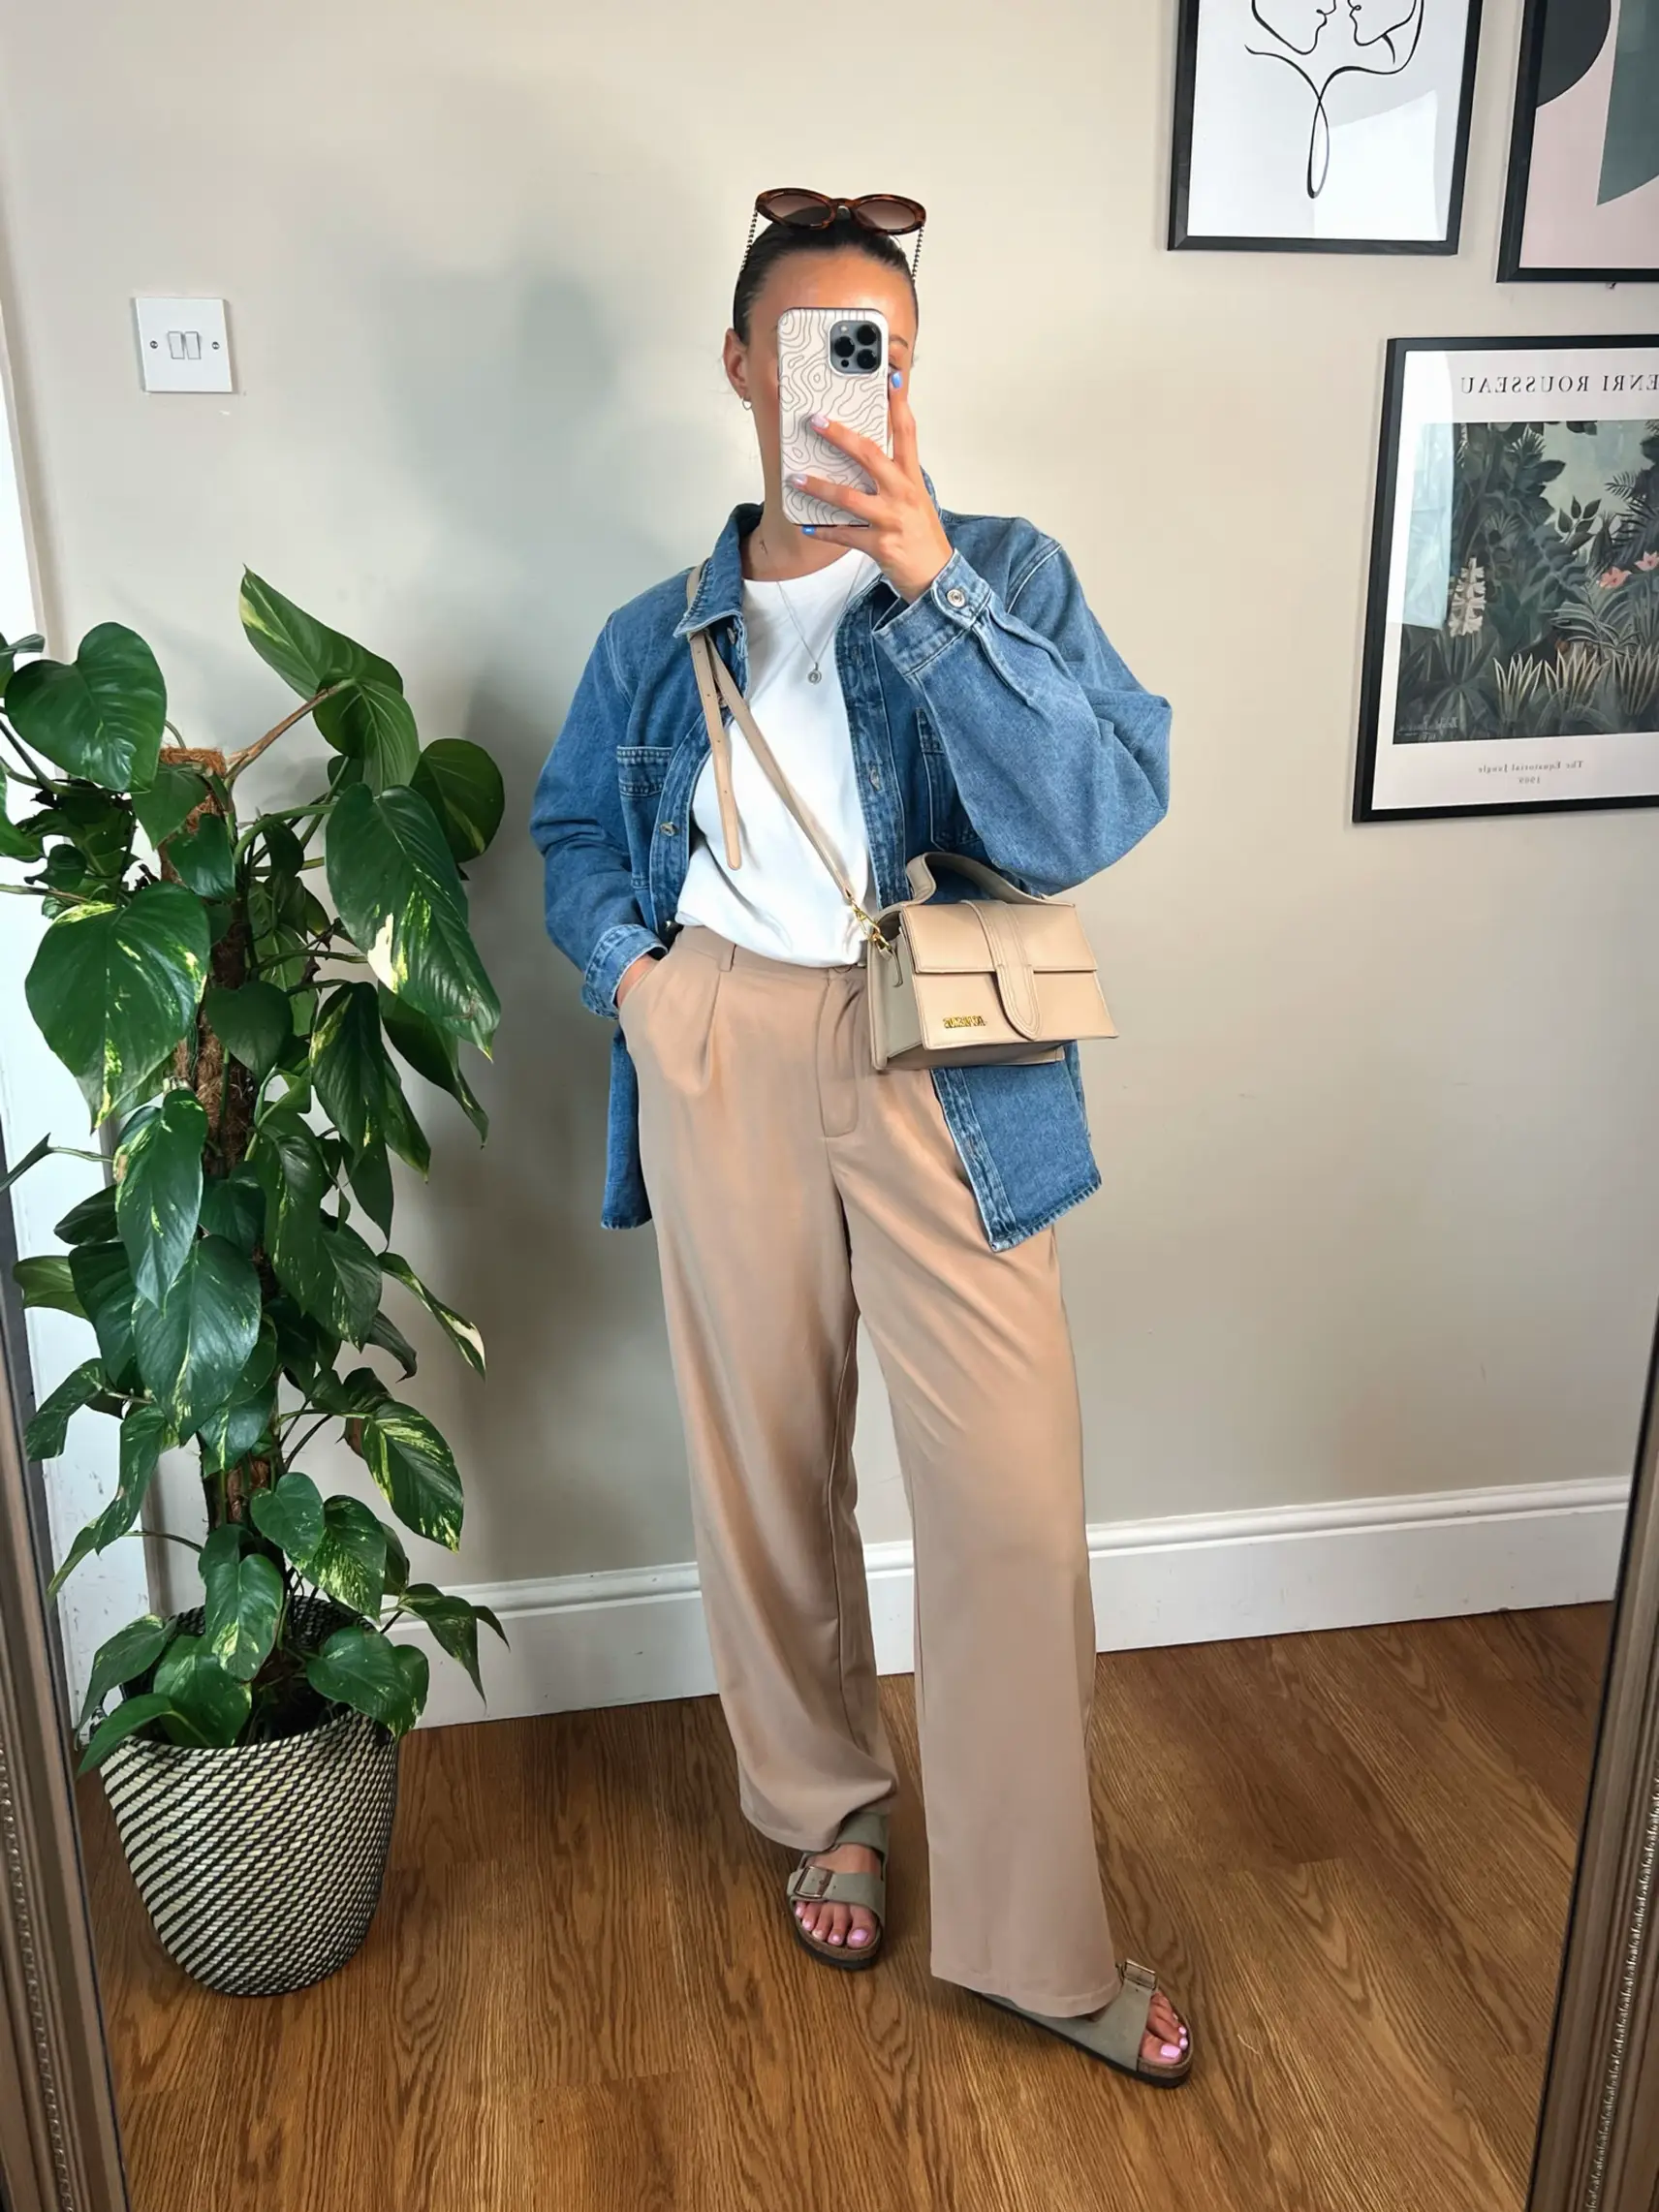 How to Wear Wide Leg Trousers in 9 Easy Fall Outfit Ideas - livelovesara